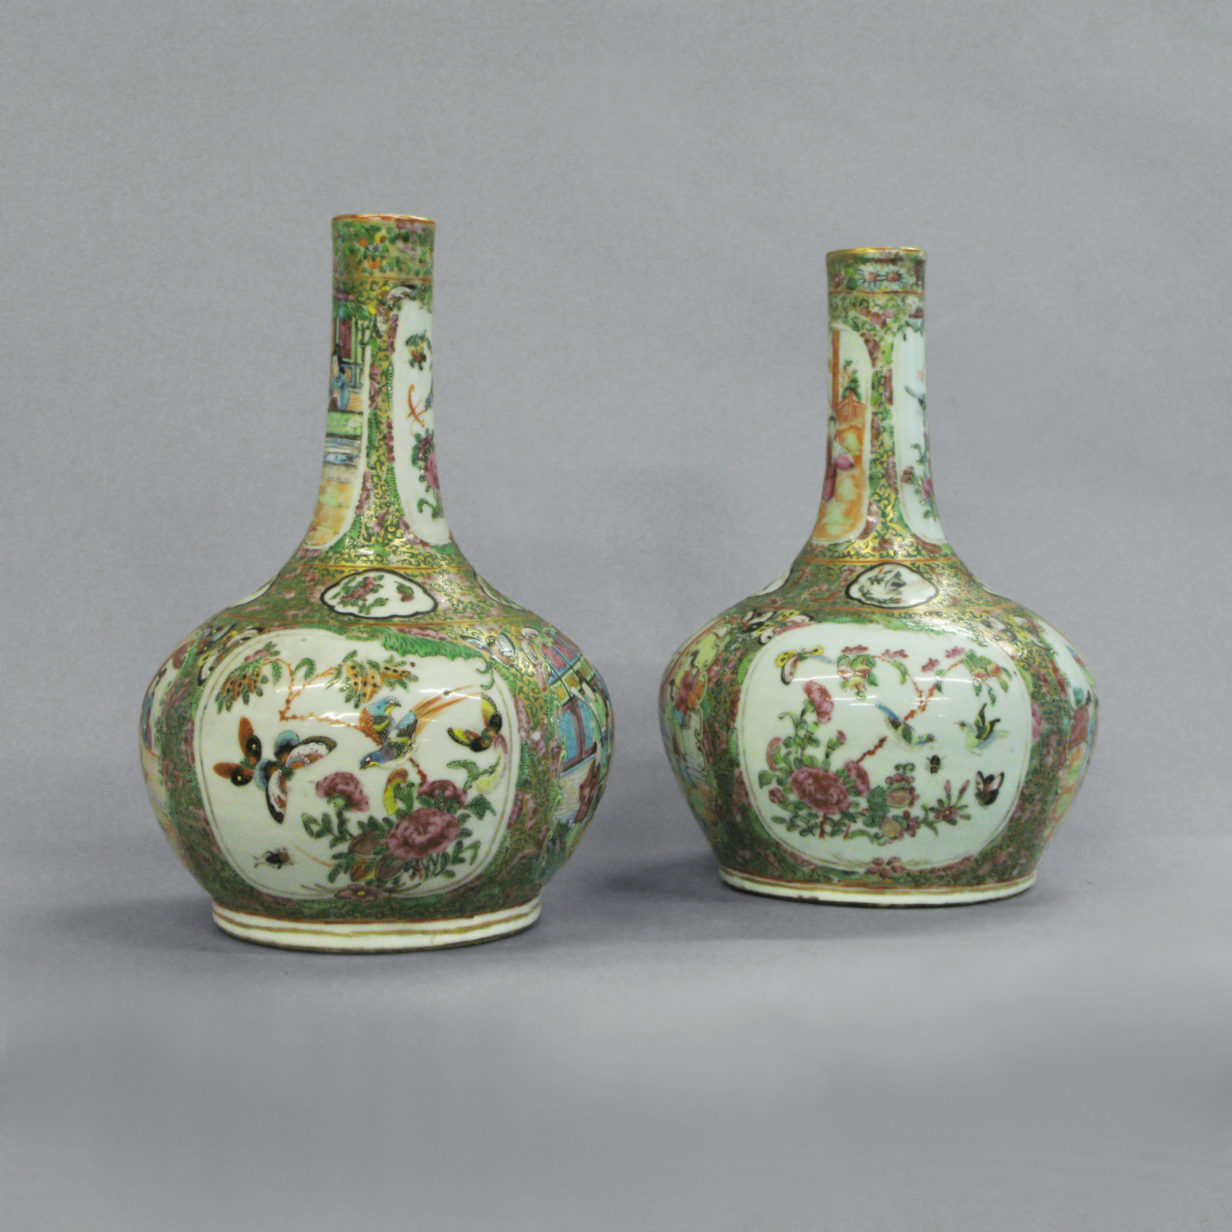 A pair of qing dynasty canton bottle vases